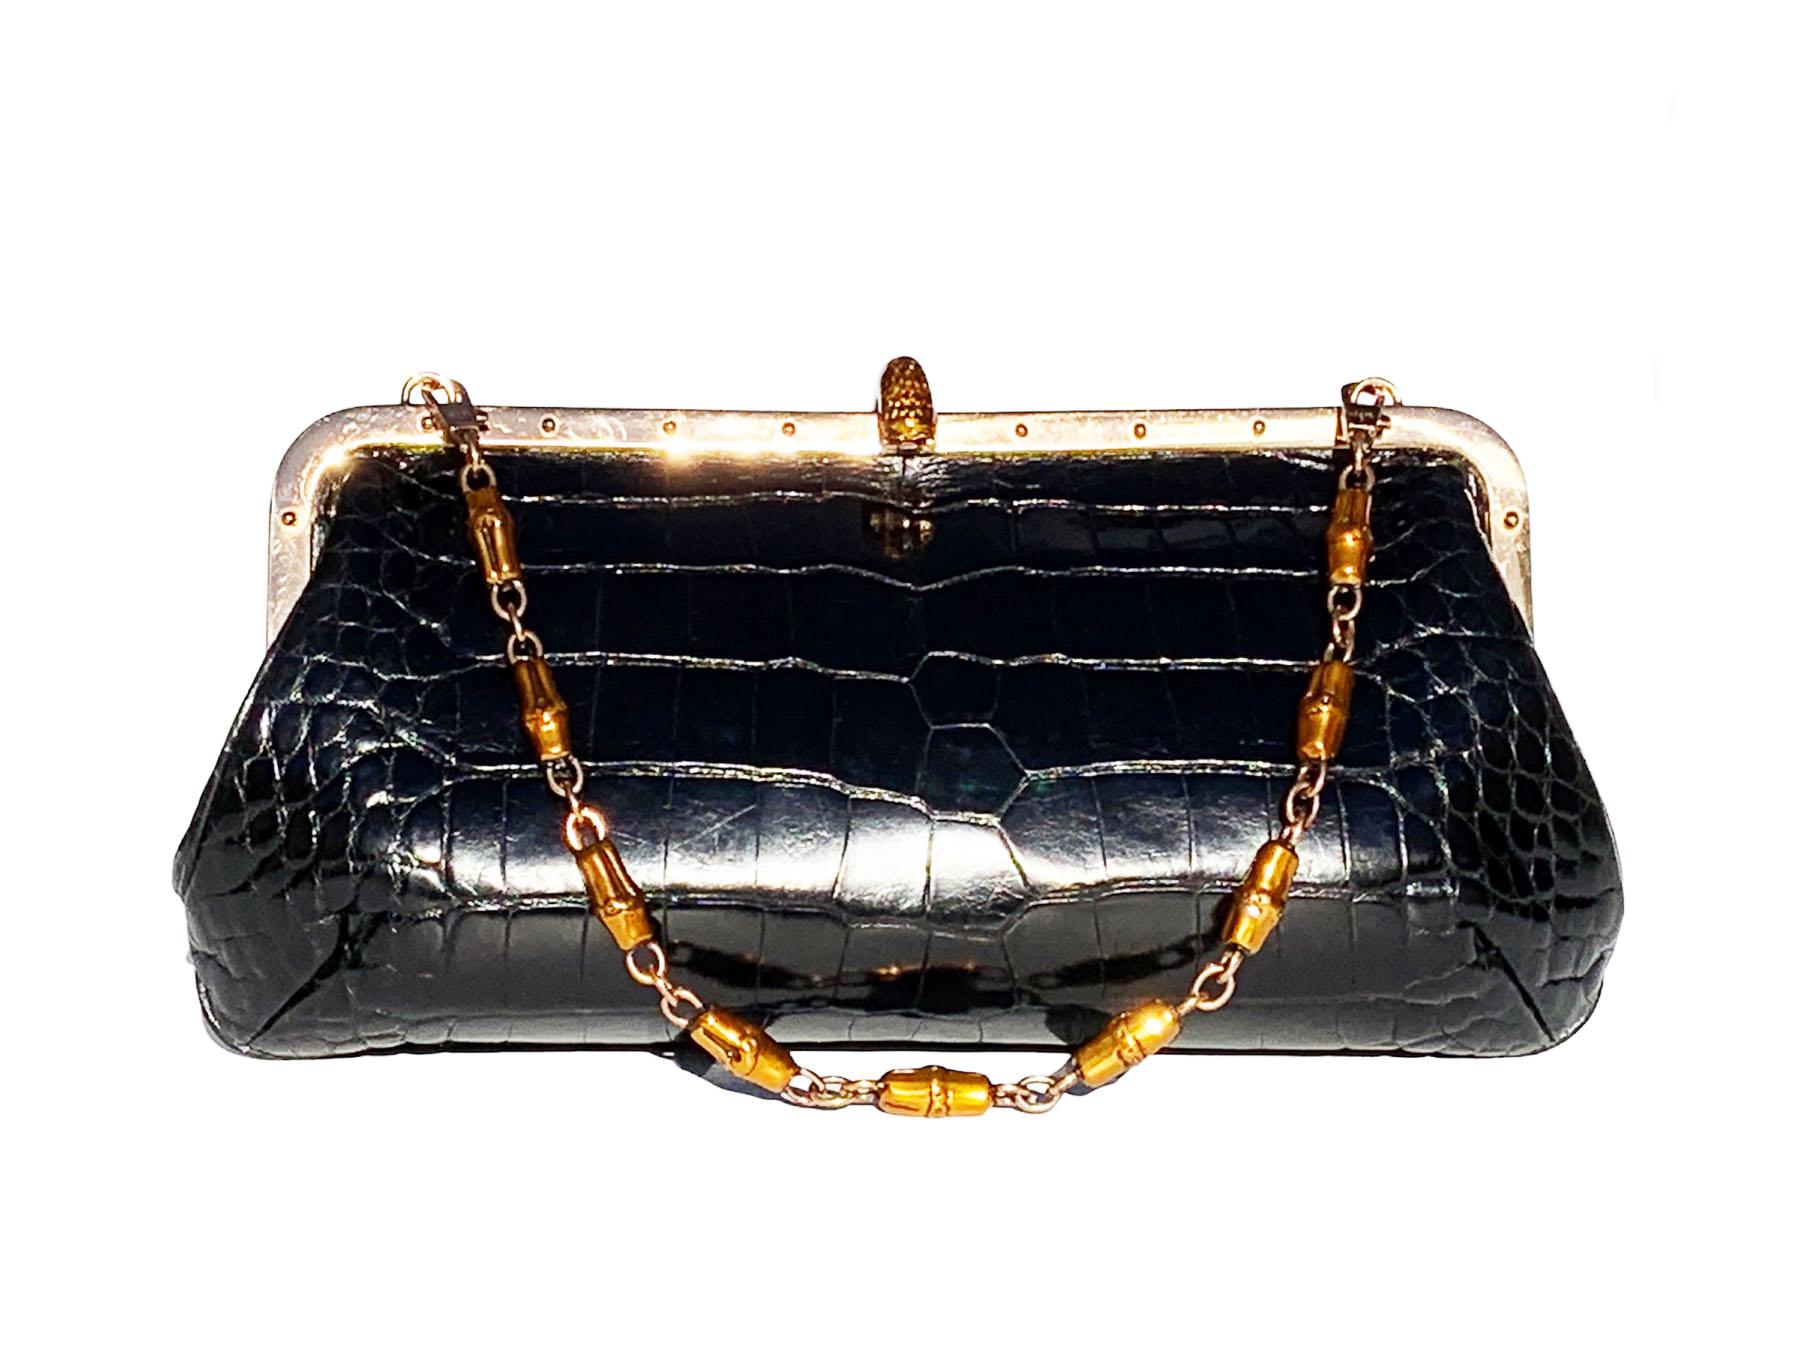 New Tom Ford for Gucci Limited Edition Black Crocodile Bag
S/S 2004 Collection
Crafted from crocodile skin, Bronze tone metal frame, Enamel clam closure finished with a large bronze tone enamel snake head with Swarovski crystals and clear crystal